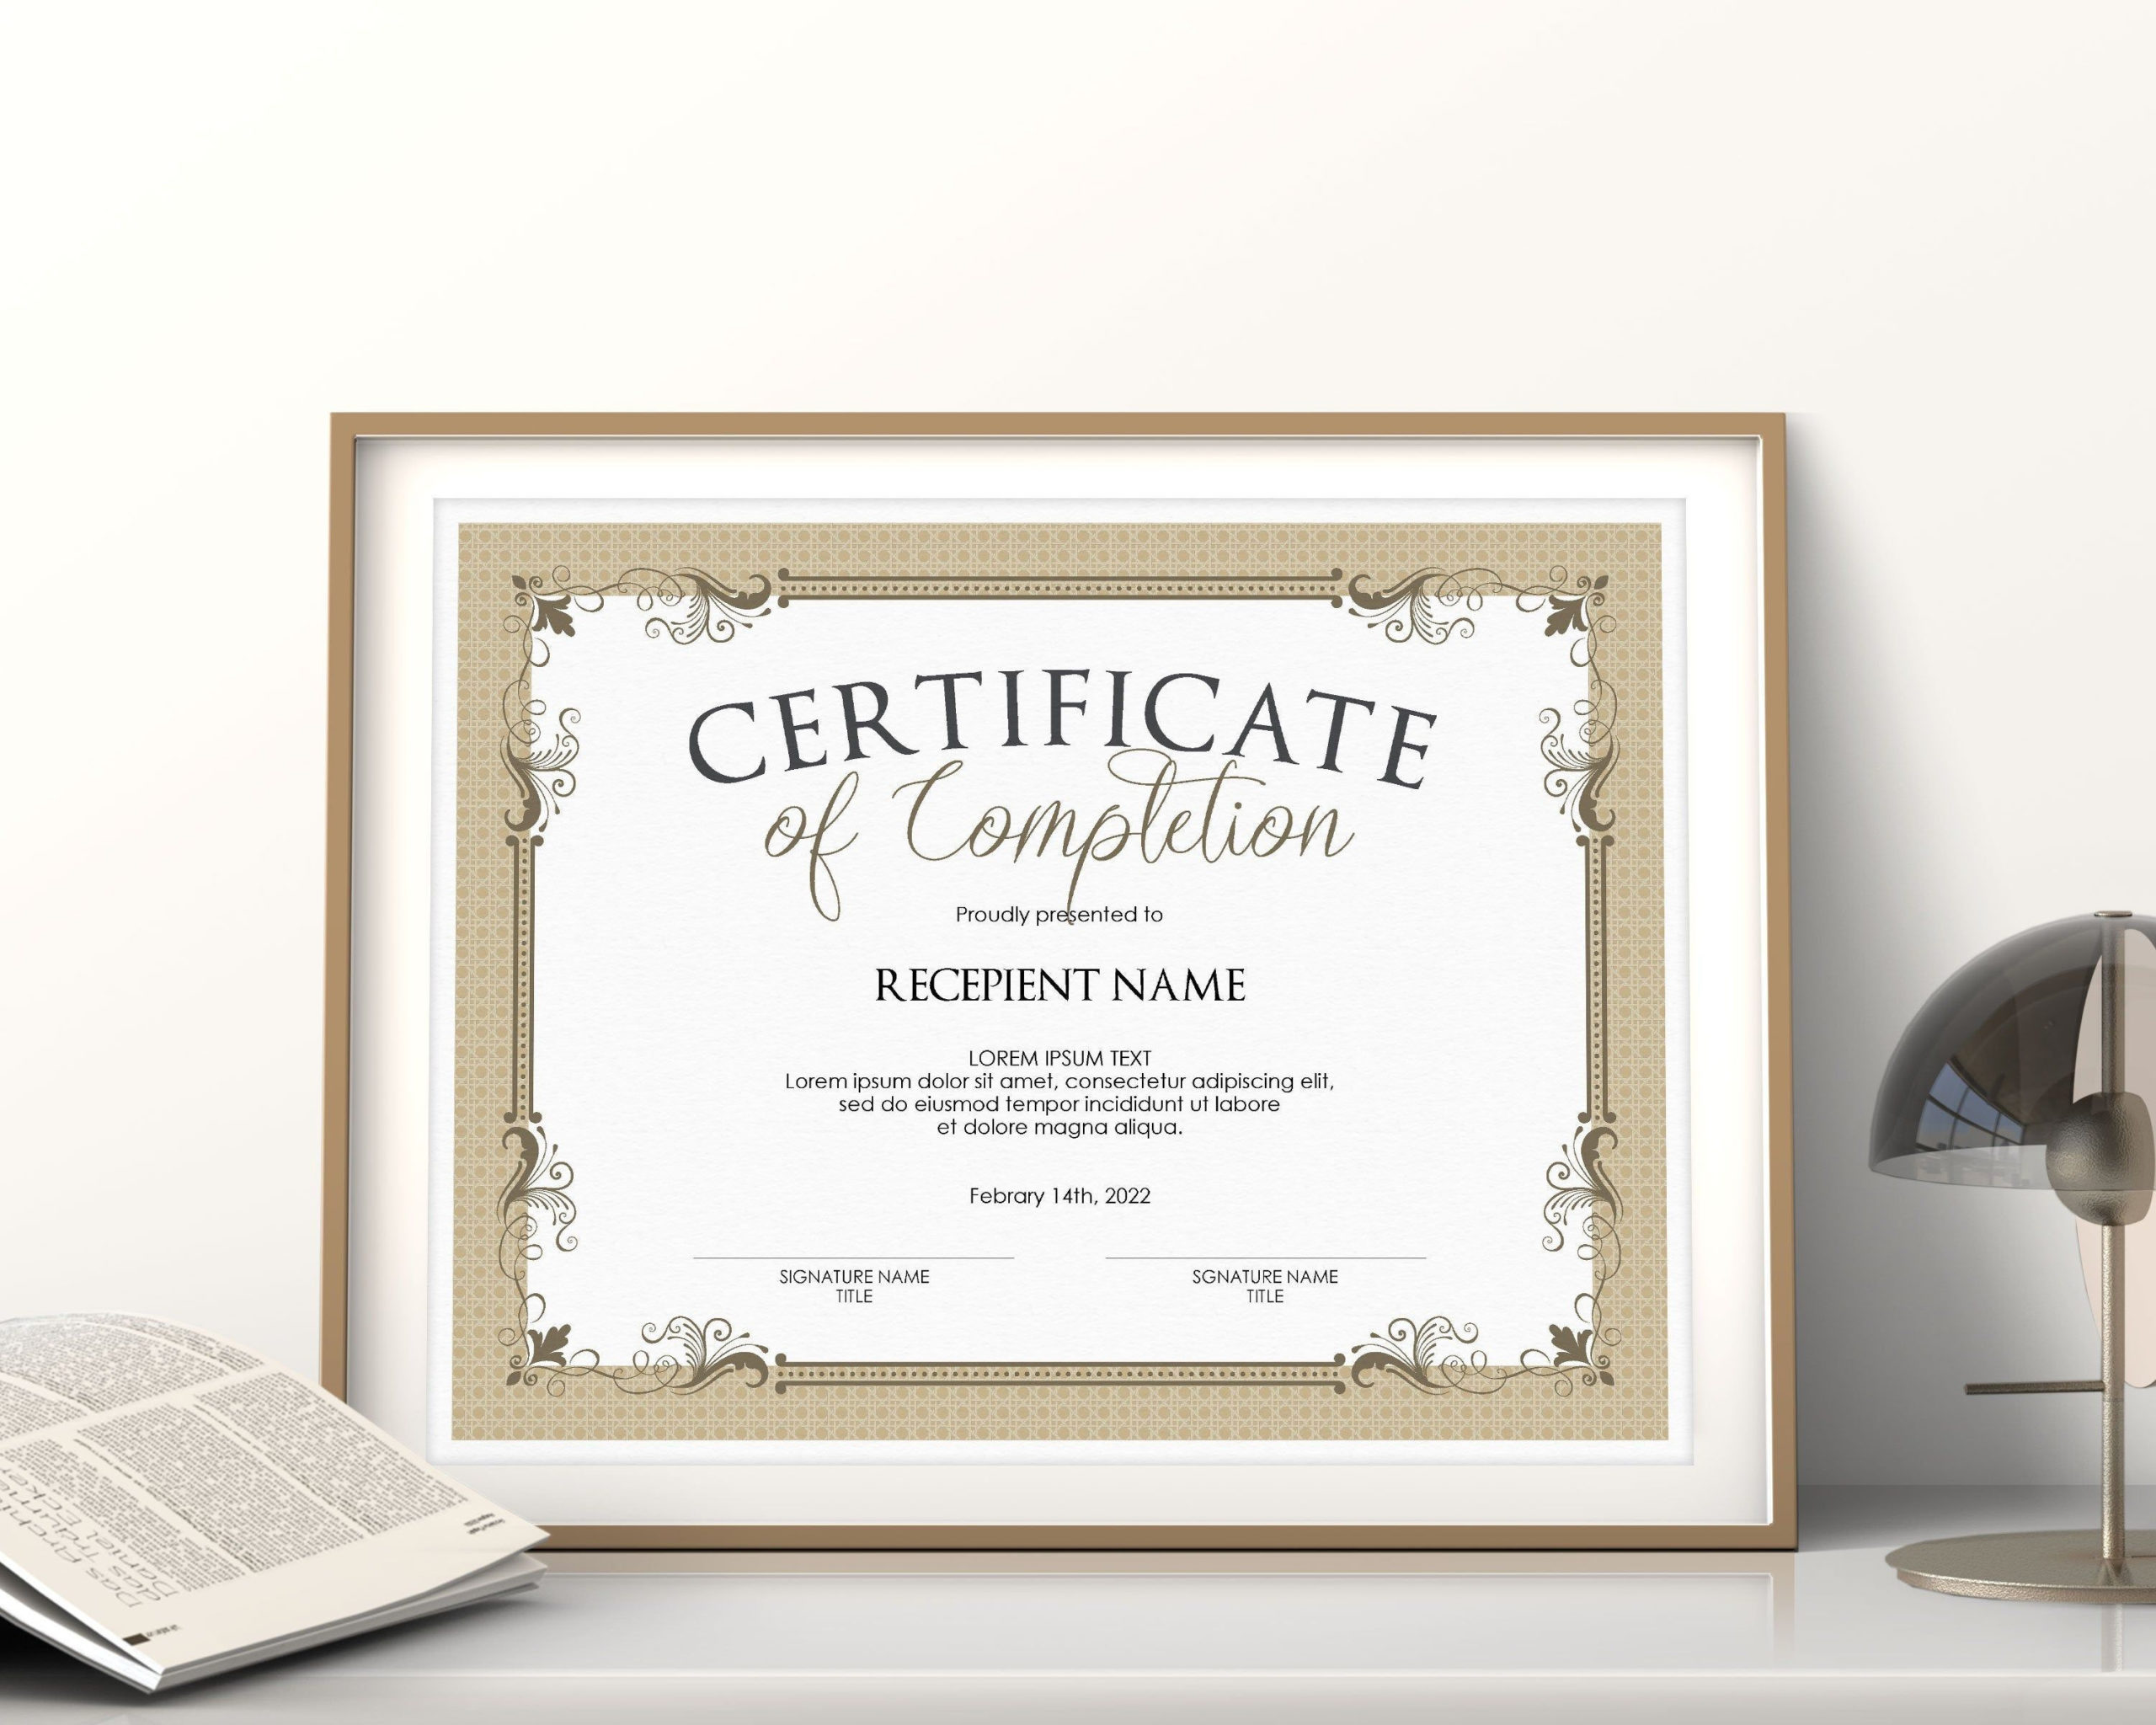 Editable Certificate Of Completion Printable Elegant | Etsy | Editable throughout Fantastic Certificate Of Completion Templates Editable